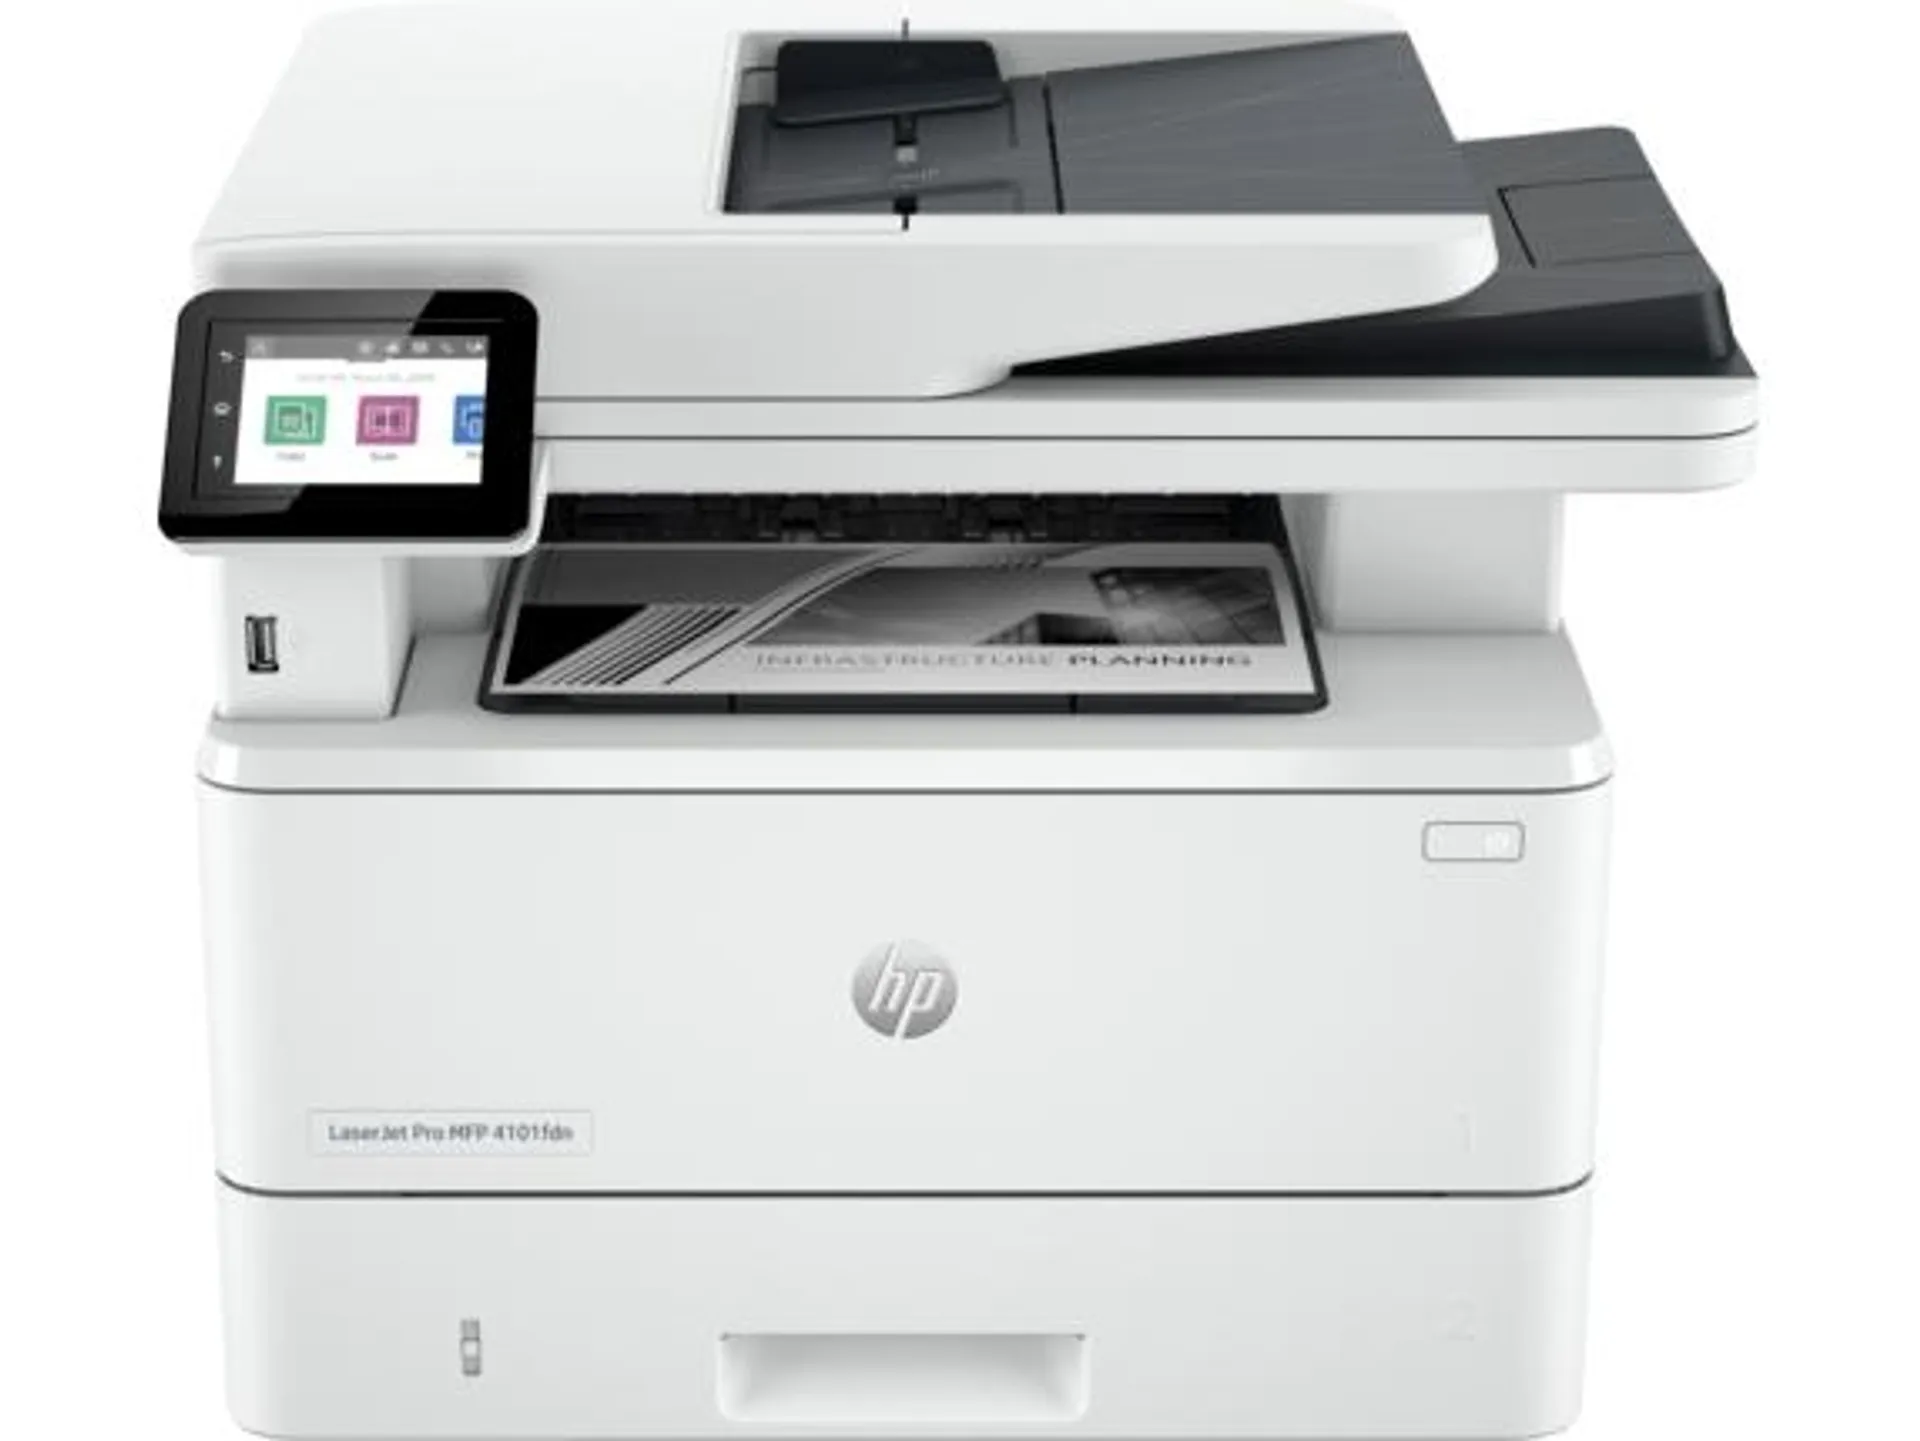 HP LaserJet Pro MFP 4101fdne Printer with HP+ and Fax